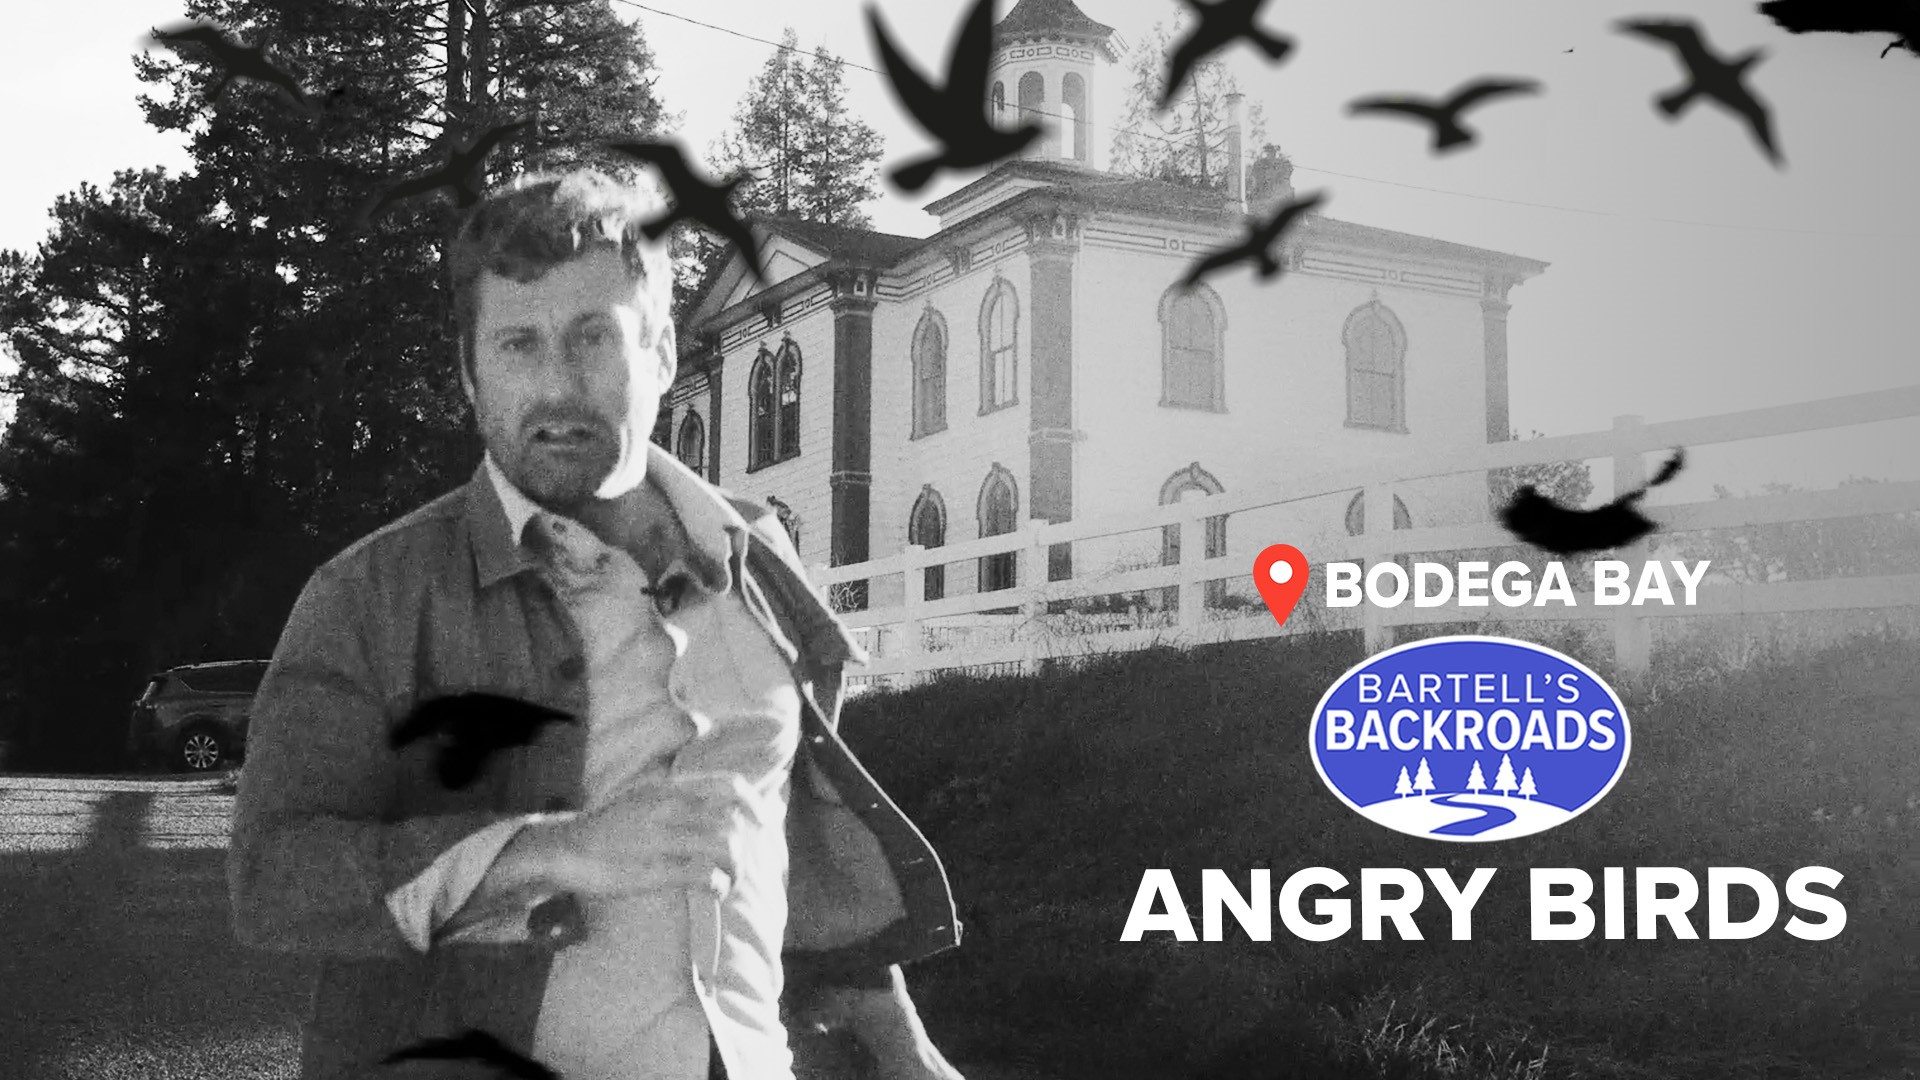 How Alfred Hitchcock's classic film changed the coastal towns of Bodega and Bodega Bay forever. Nearly 60 year on, it's still a tourist draw for fans.